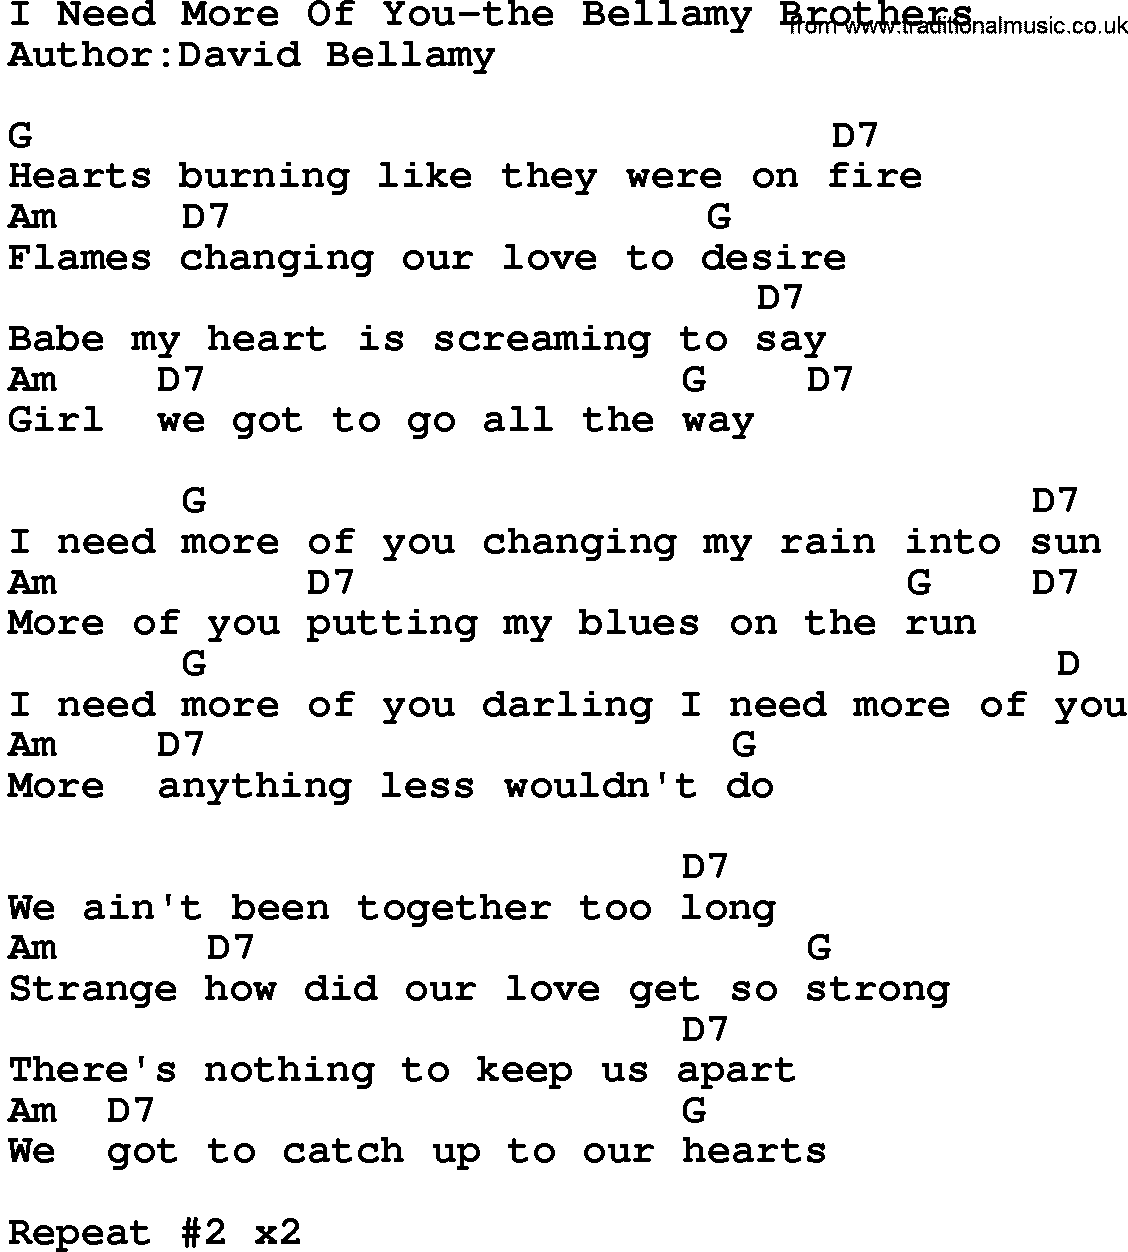 Country music song: I Need More Of You-The Bellamy Brothers lyrics and chords